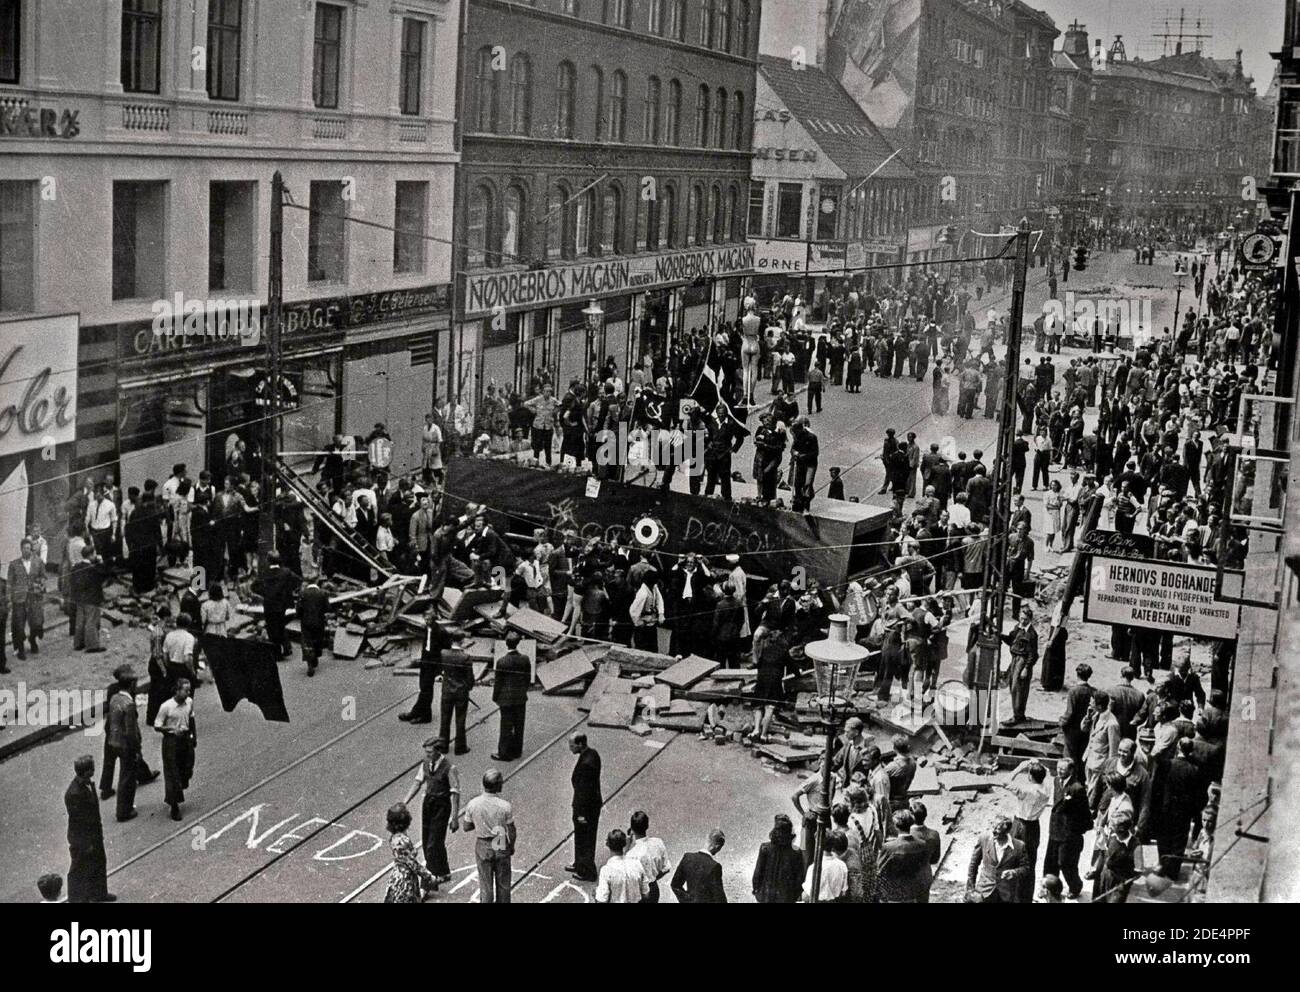 A historic photo of a 1944 riot in Norrebro, Copenhagen during the German occupation of Denmark. Stock Photo